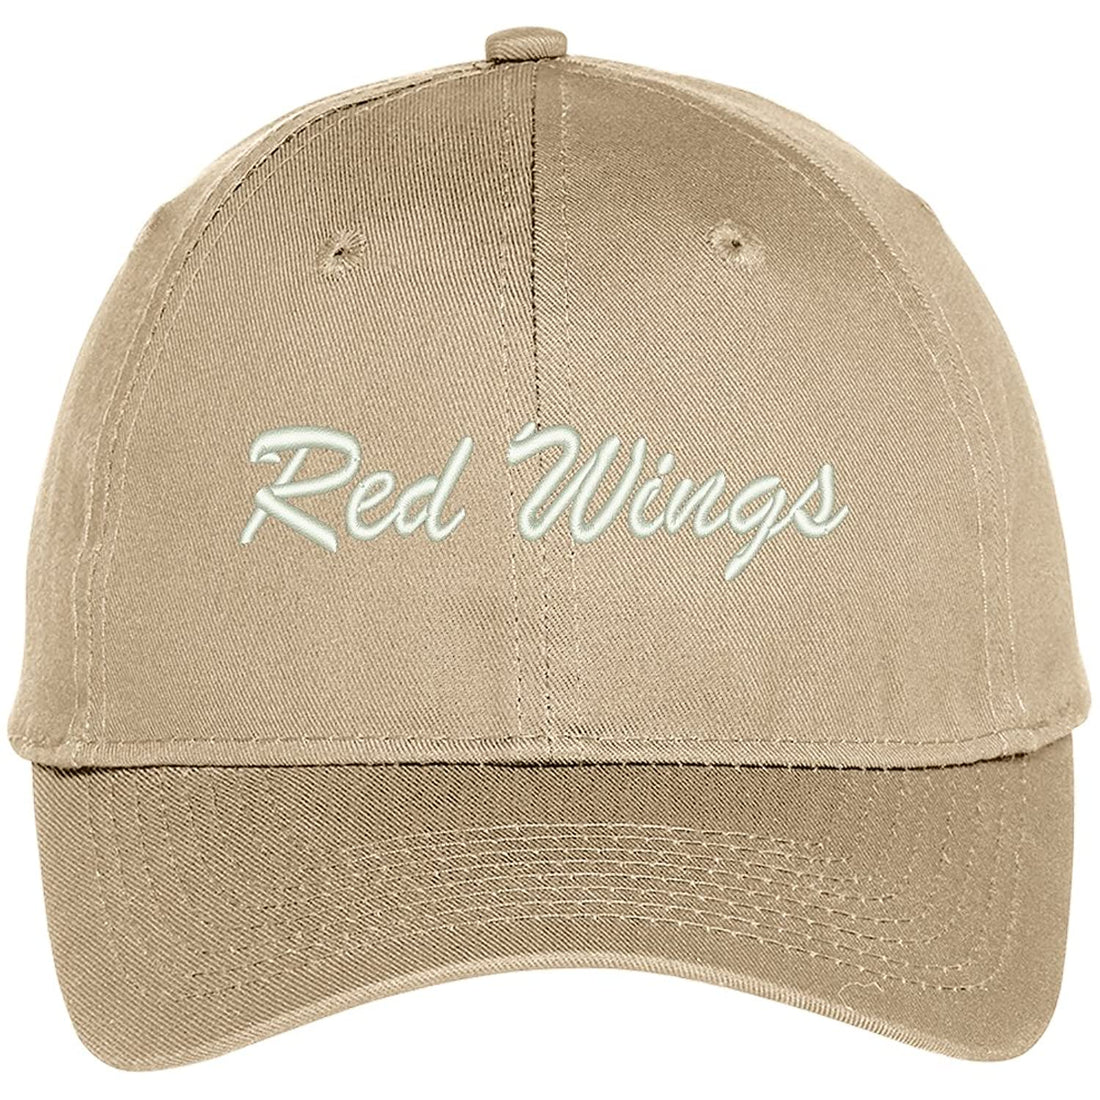 Trendy Apparel Shop Red Wings Embroidered Precurved Adjustable Cap